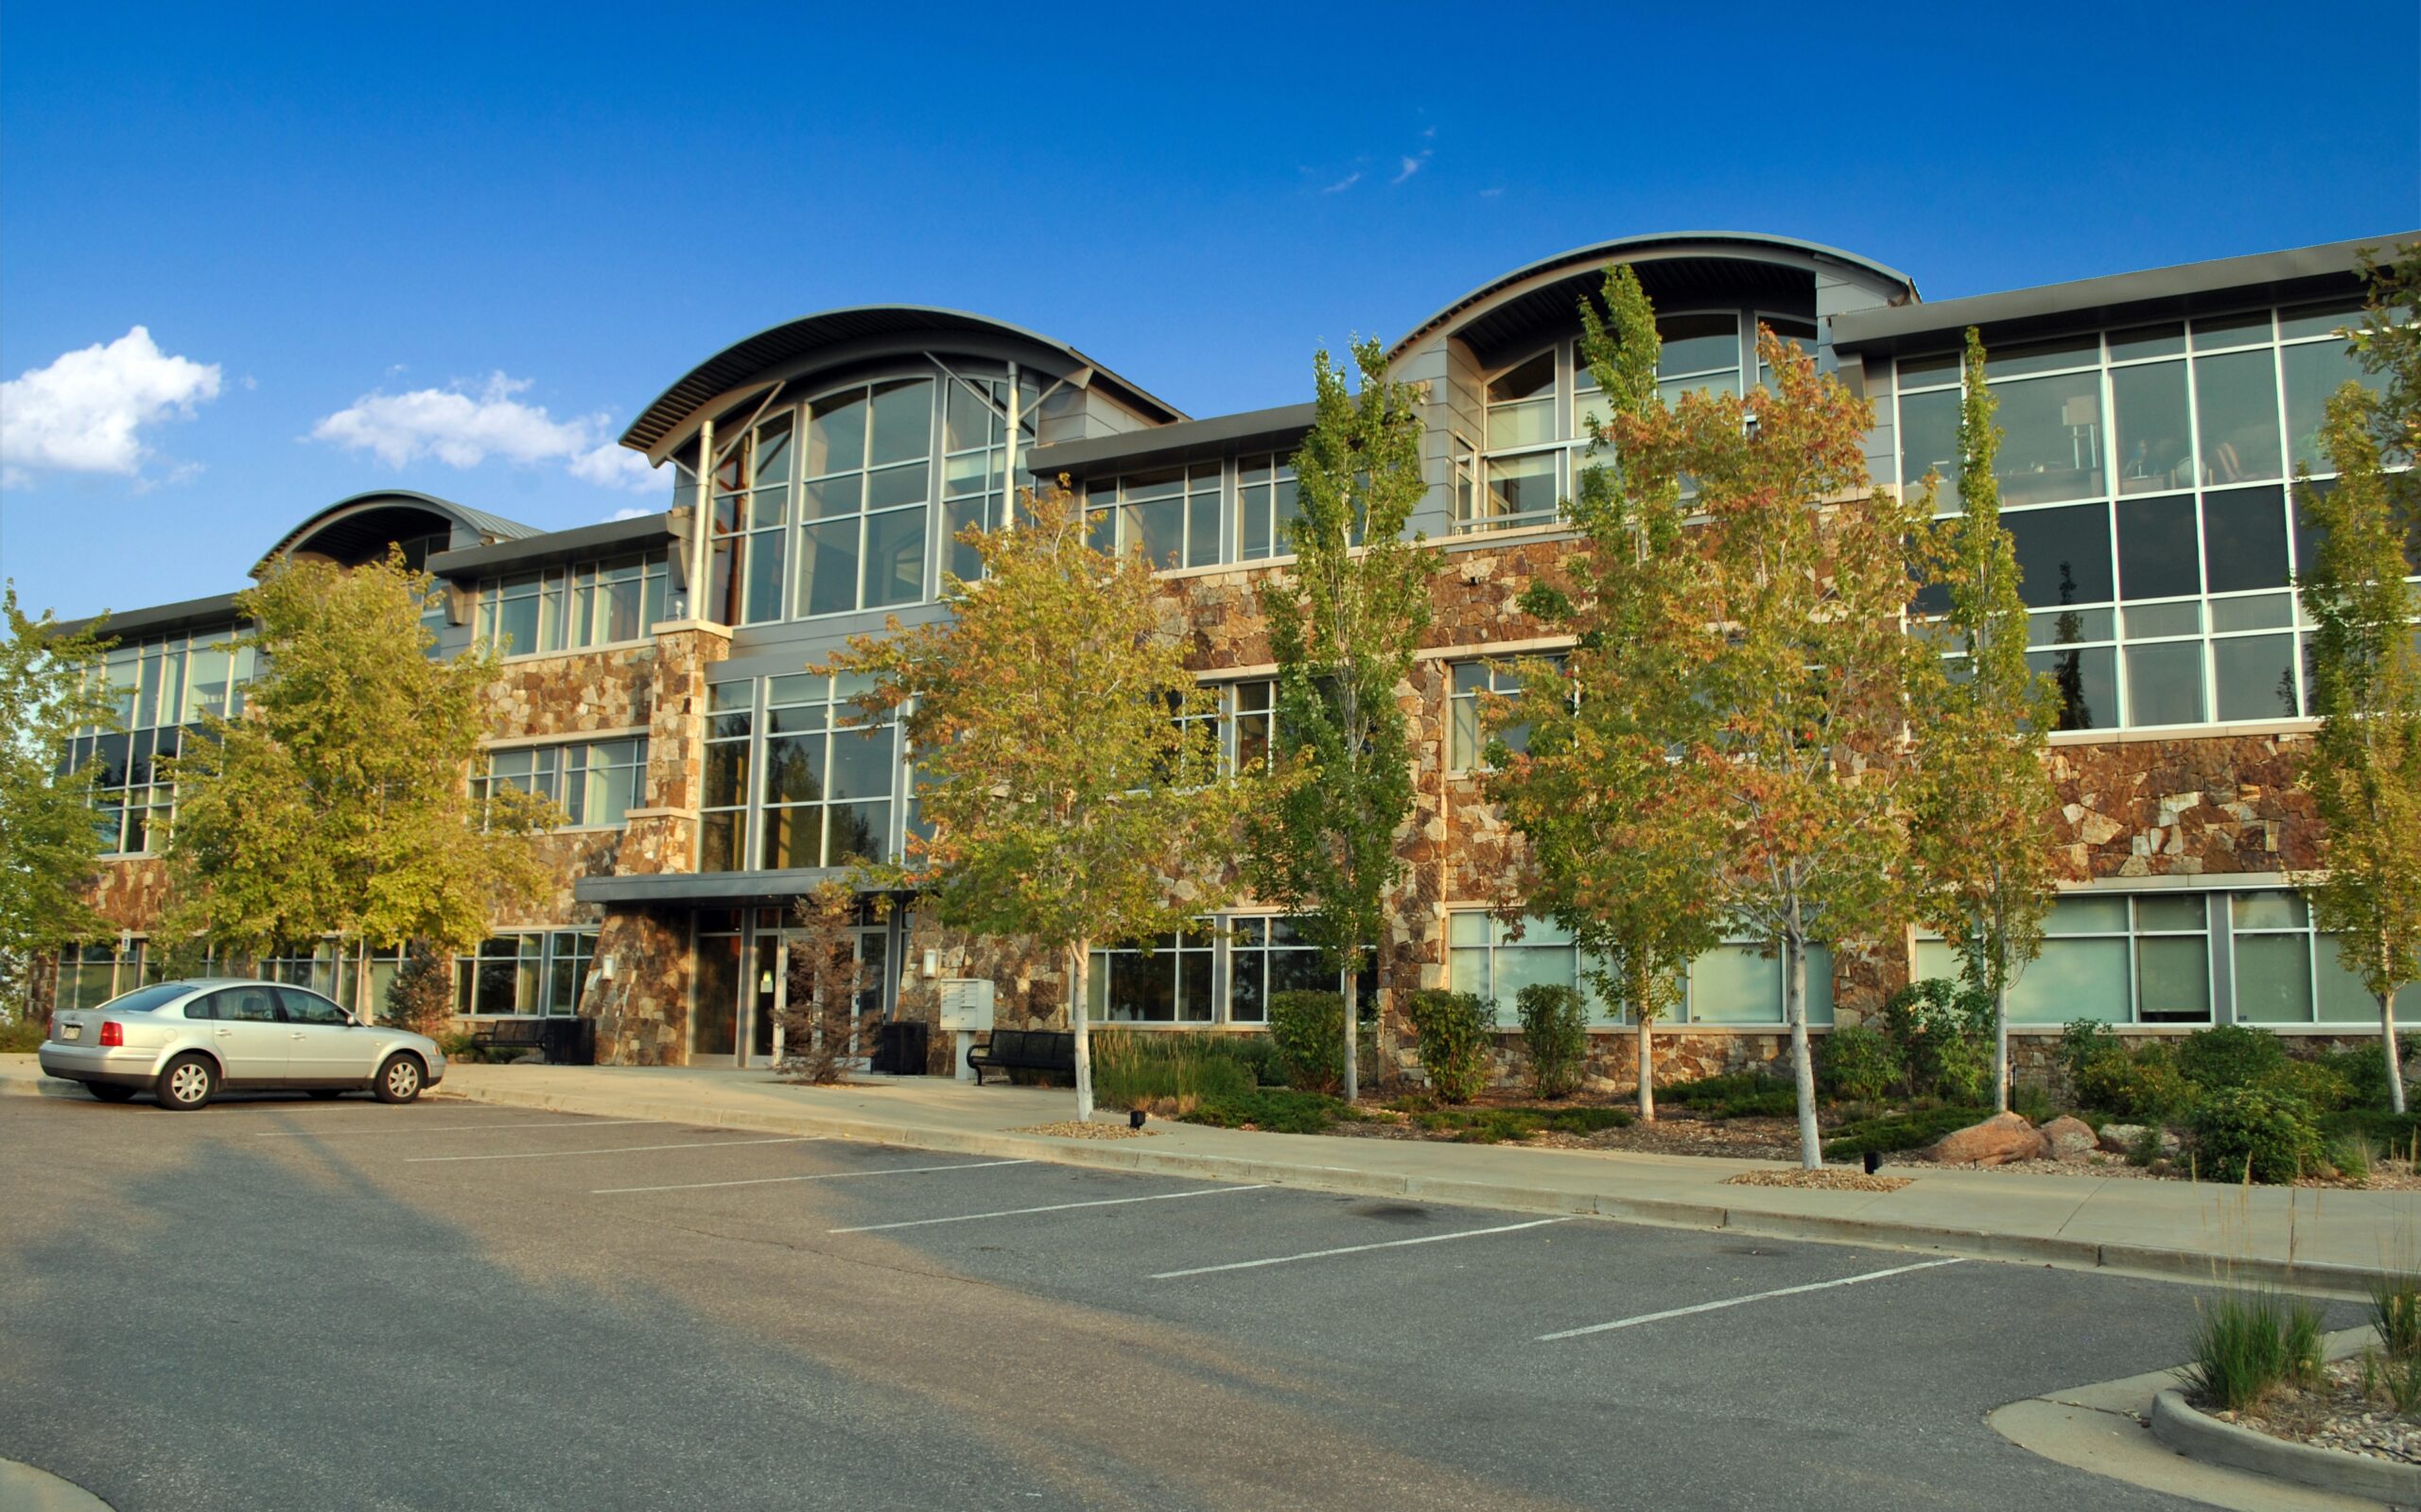 5-Year Lease Executed in Superior, Colorado